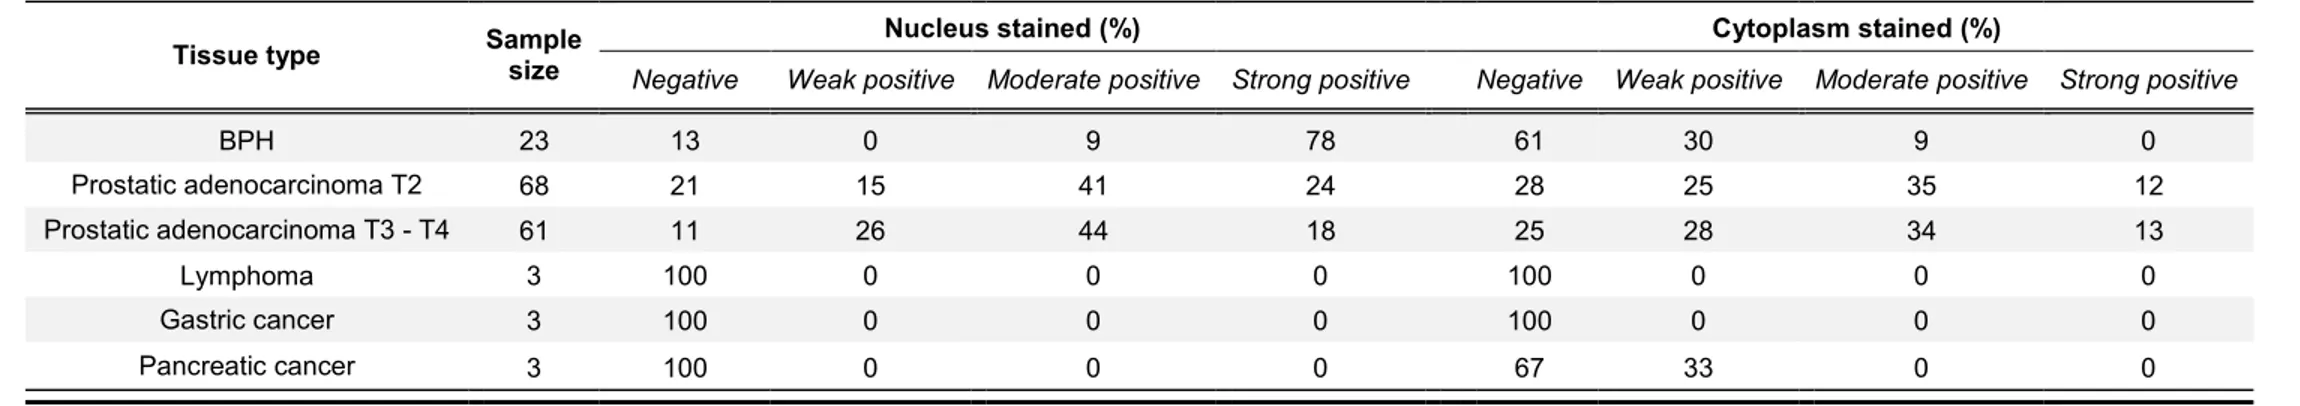 Table 3. Summary of tissue stained with CG3 aptamer 